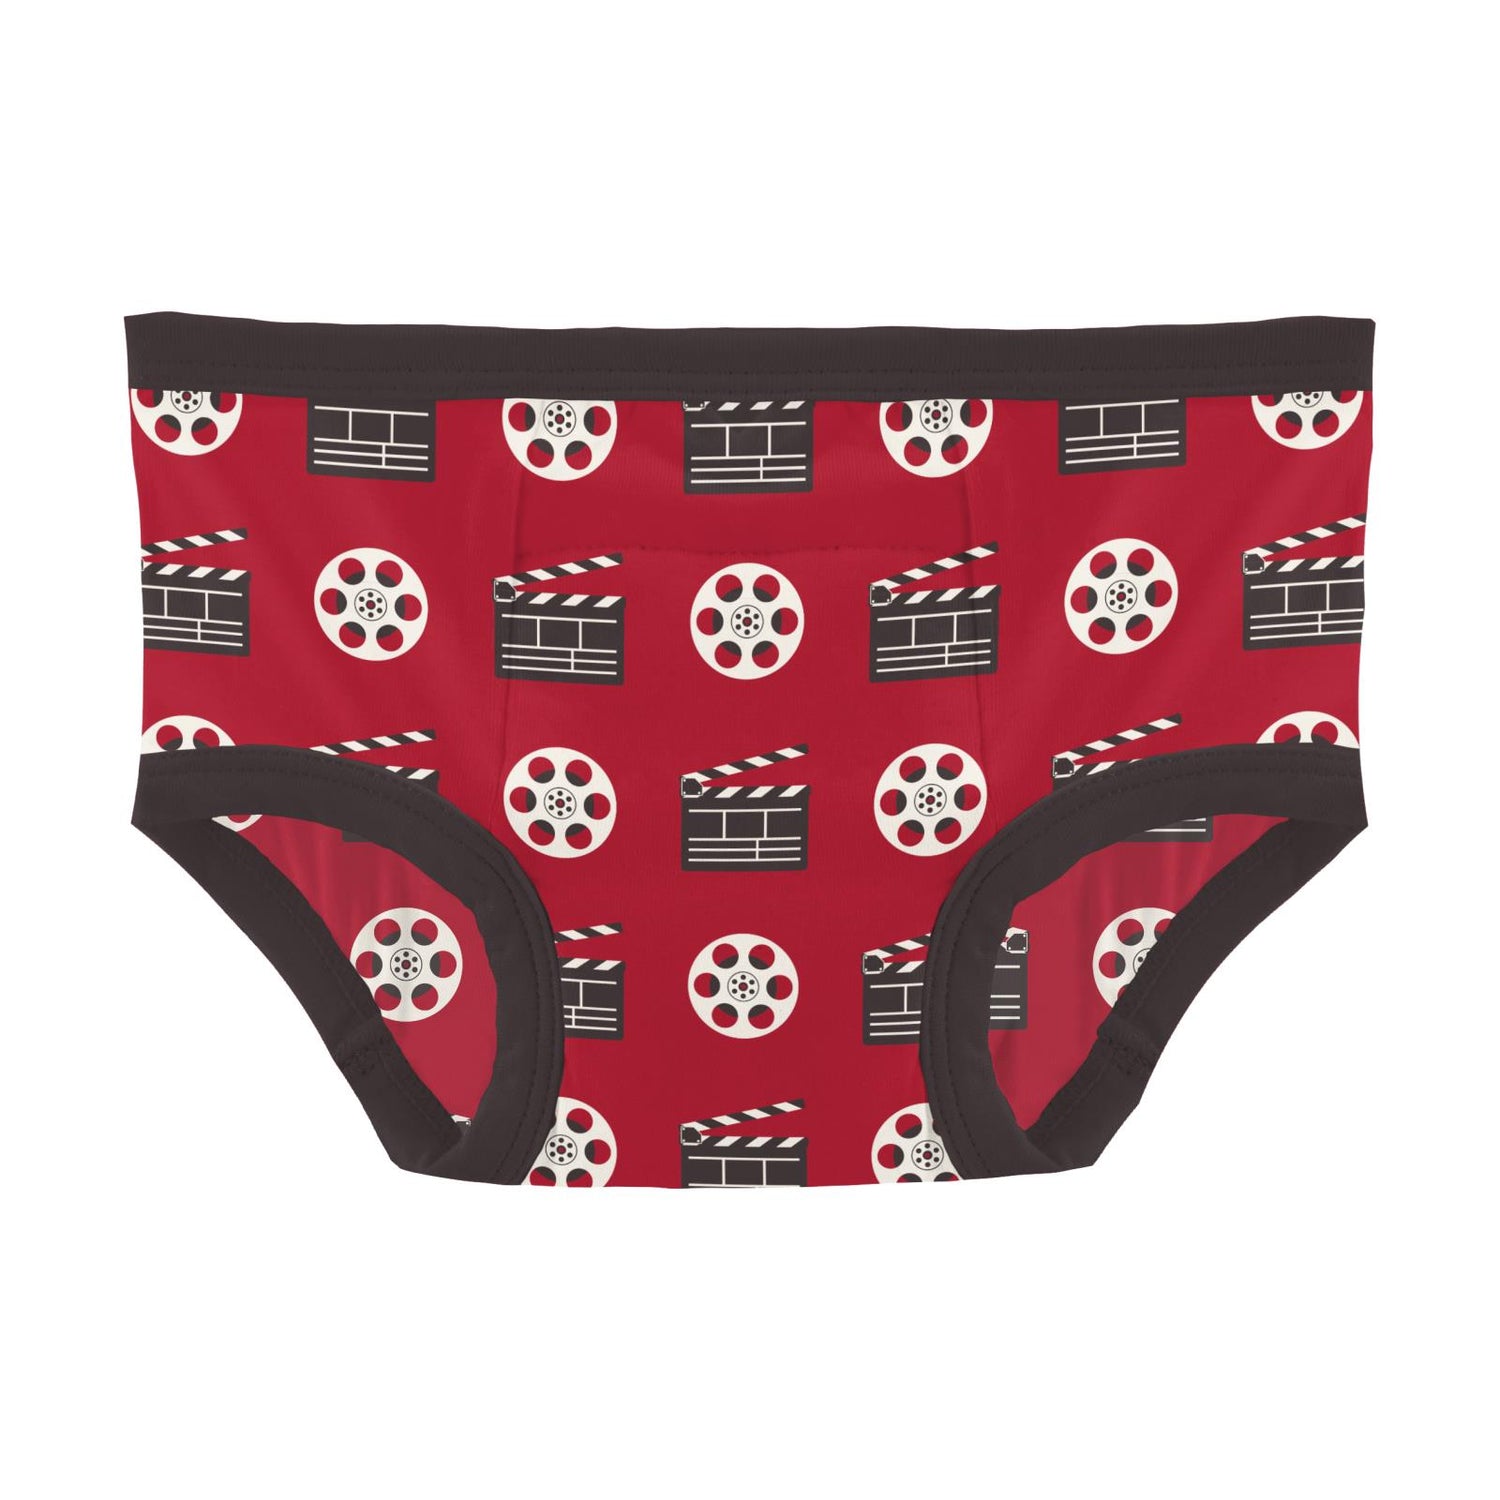 Print Training Pants in Candy Apple Clapper Board and Film